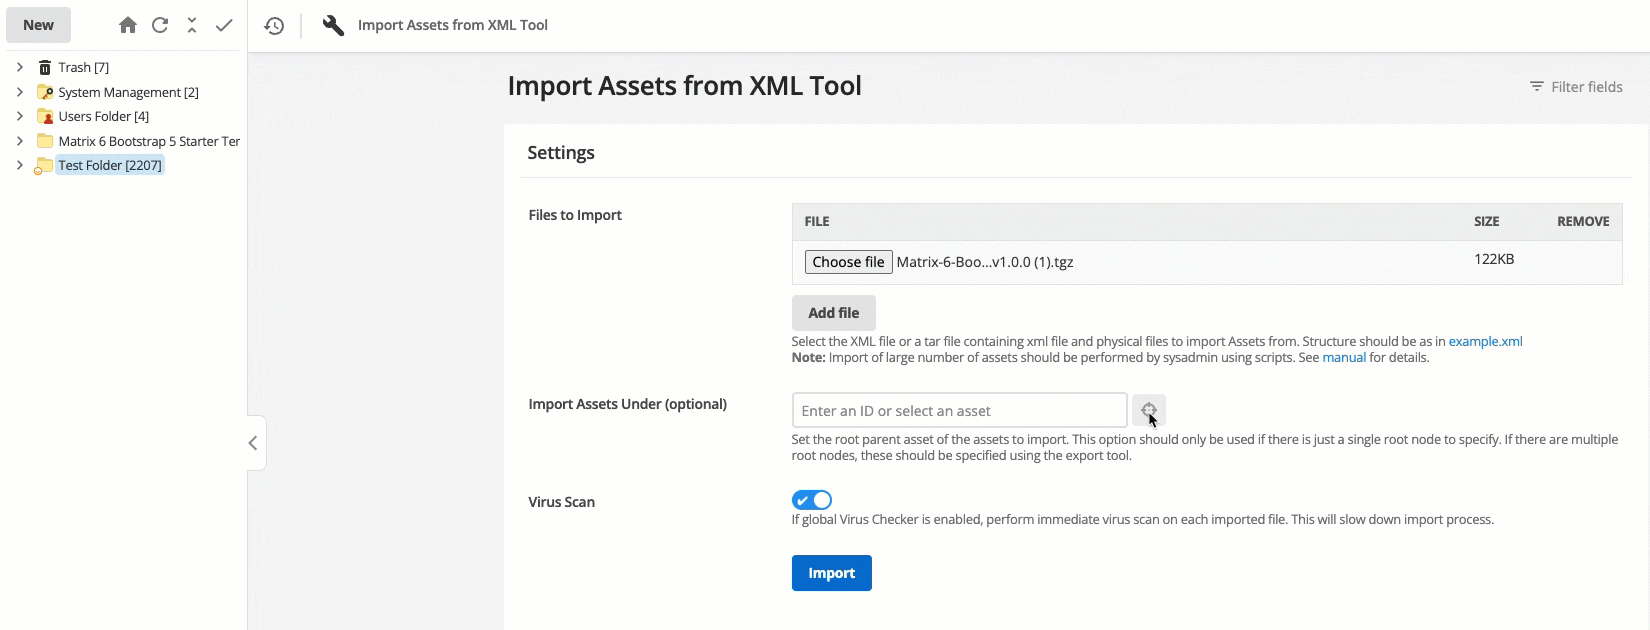 This gif shows how to make Matrix fill in the parent asset field automatically. It shows the user clicking on the Chooser button